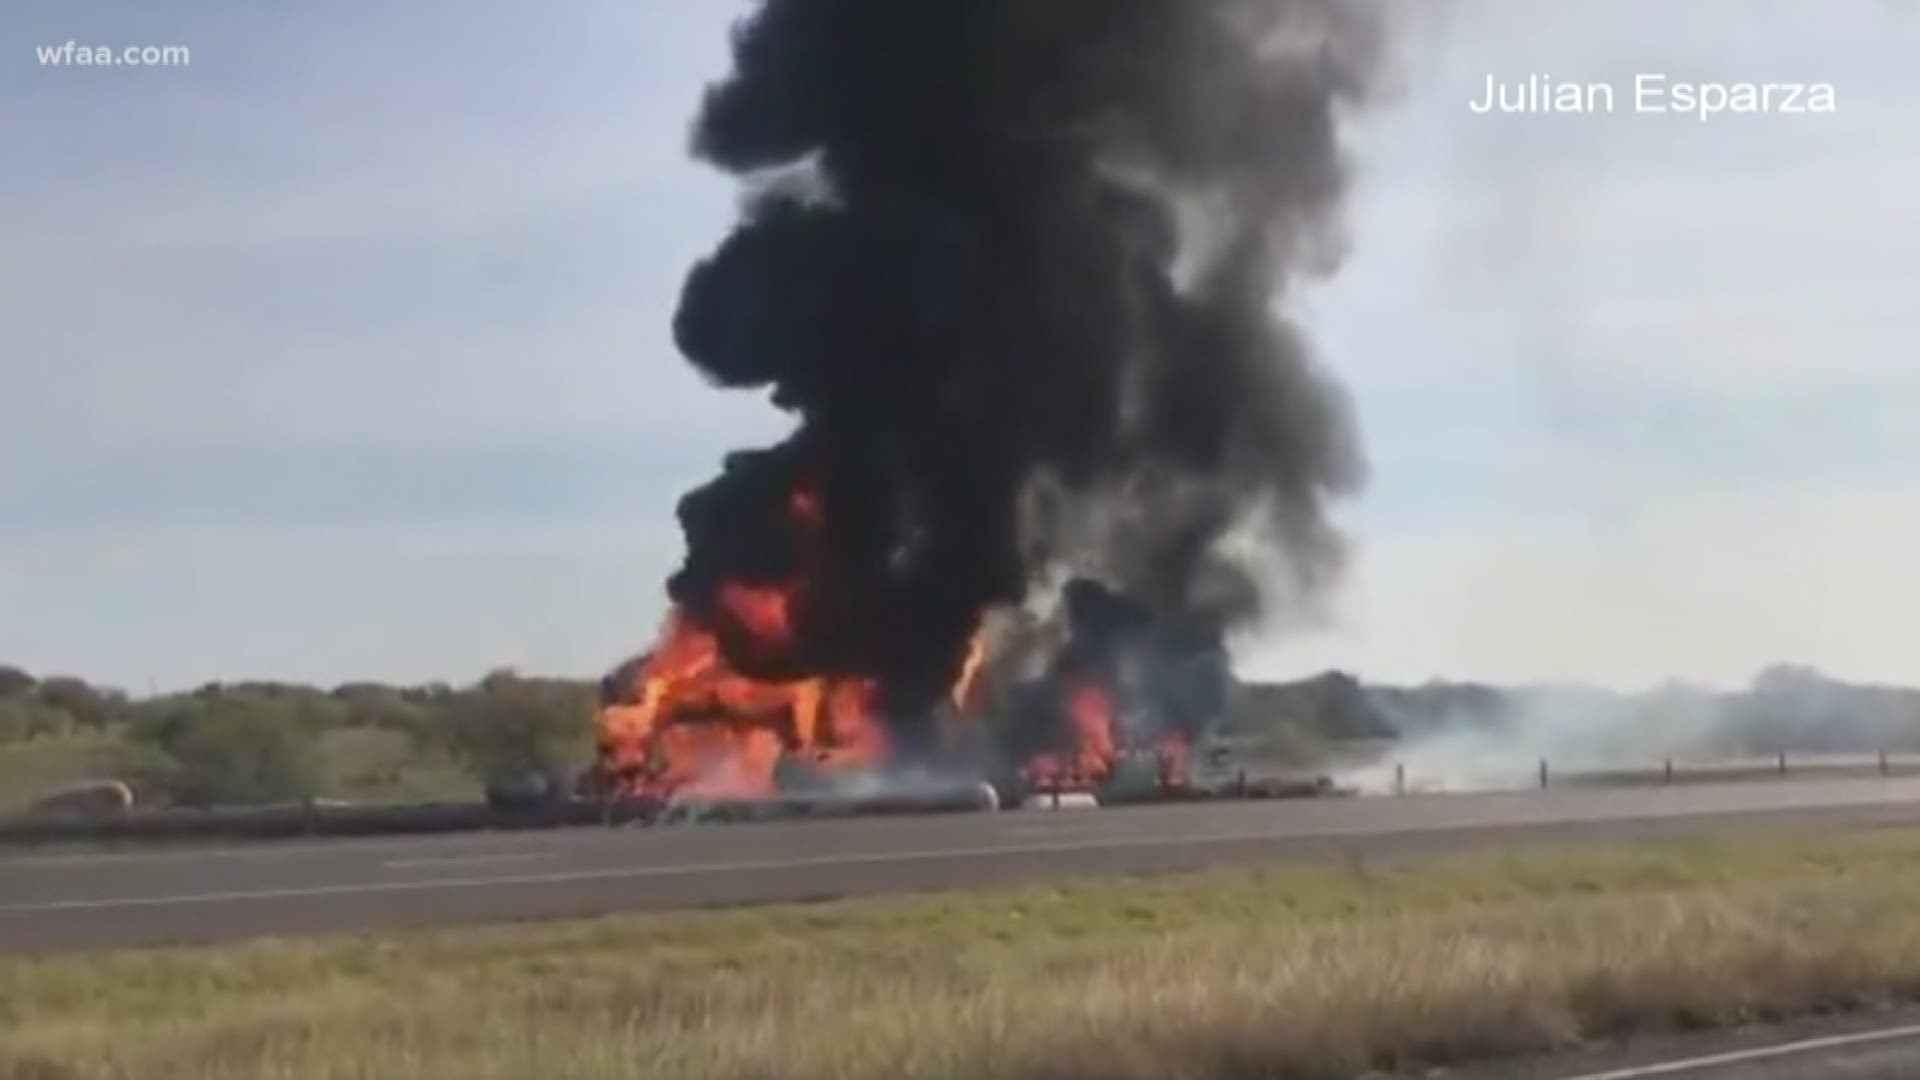 Police shut down northbound lanes of I-35W as firefighters worked the scene after the 18-wheeler caught fire.